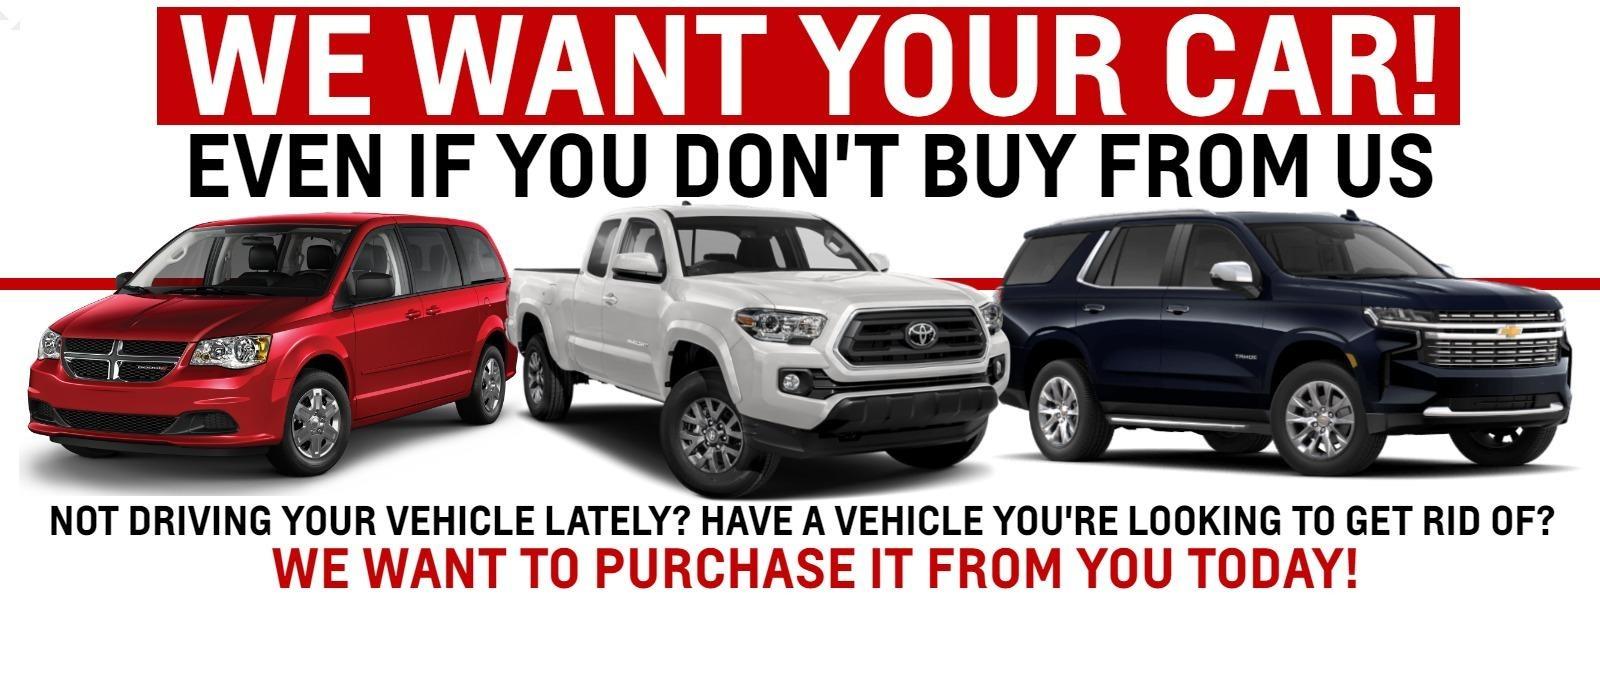 Trade In Your Vehicle to Roe Motors. We Also Buy Cars!